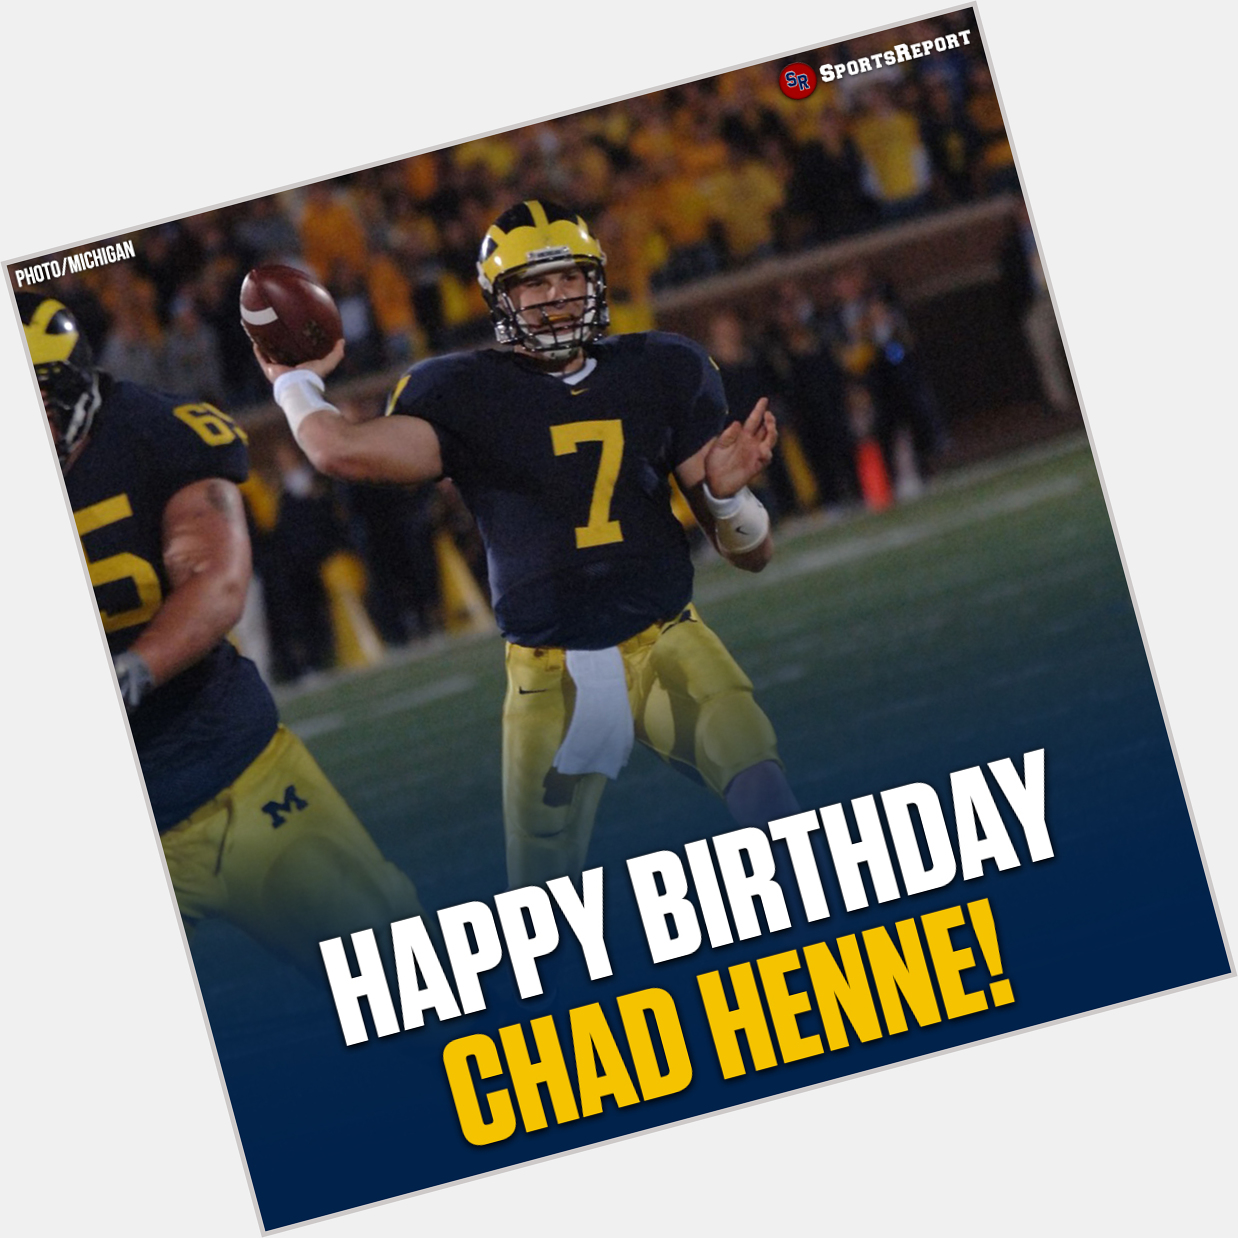  Fans, let\s wish great Chad Henne a Happy Birthday! 